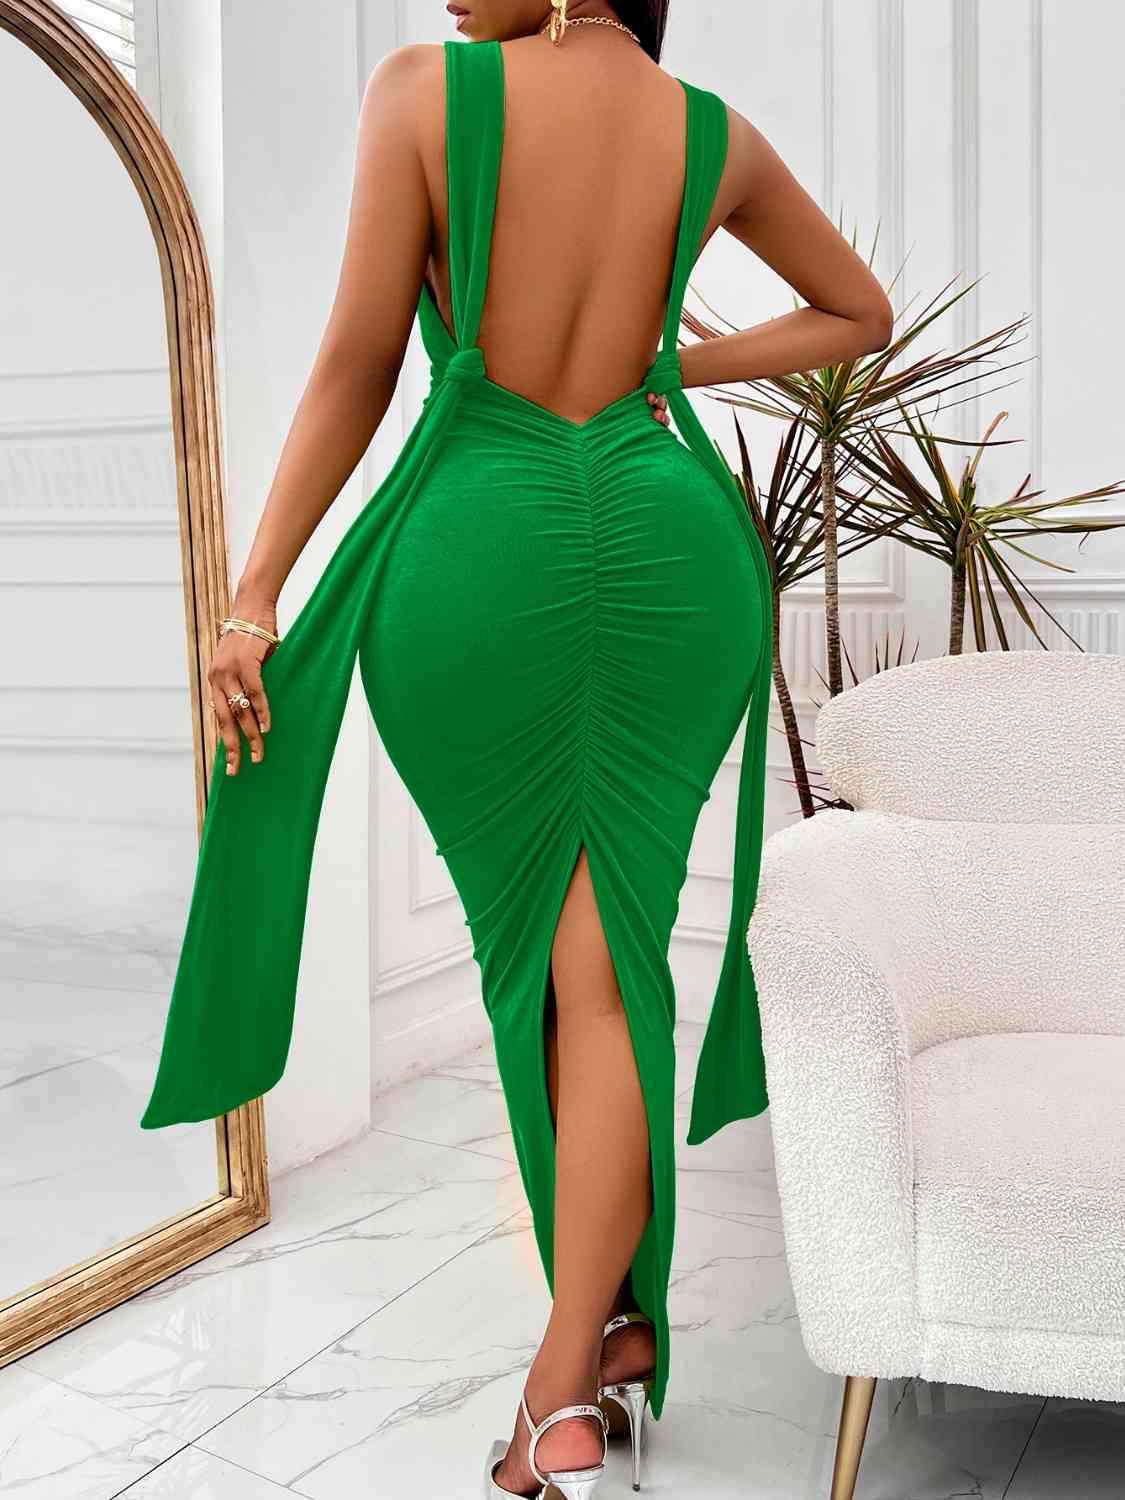 a woman in a green dress with a backless dress